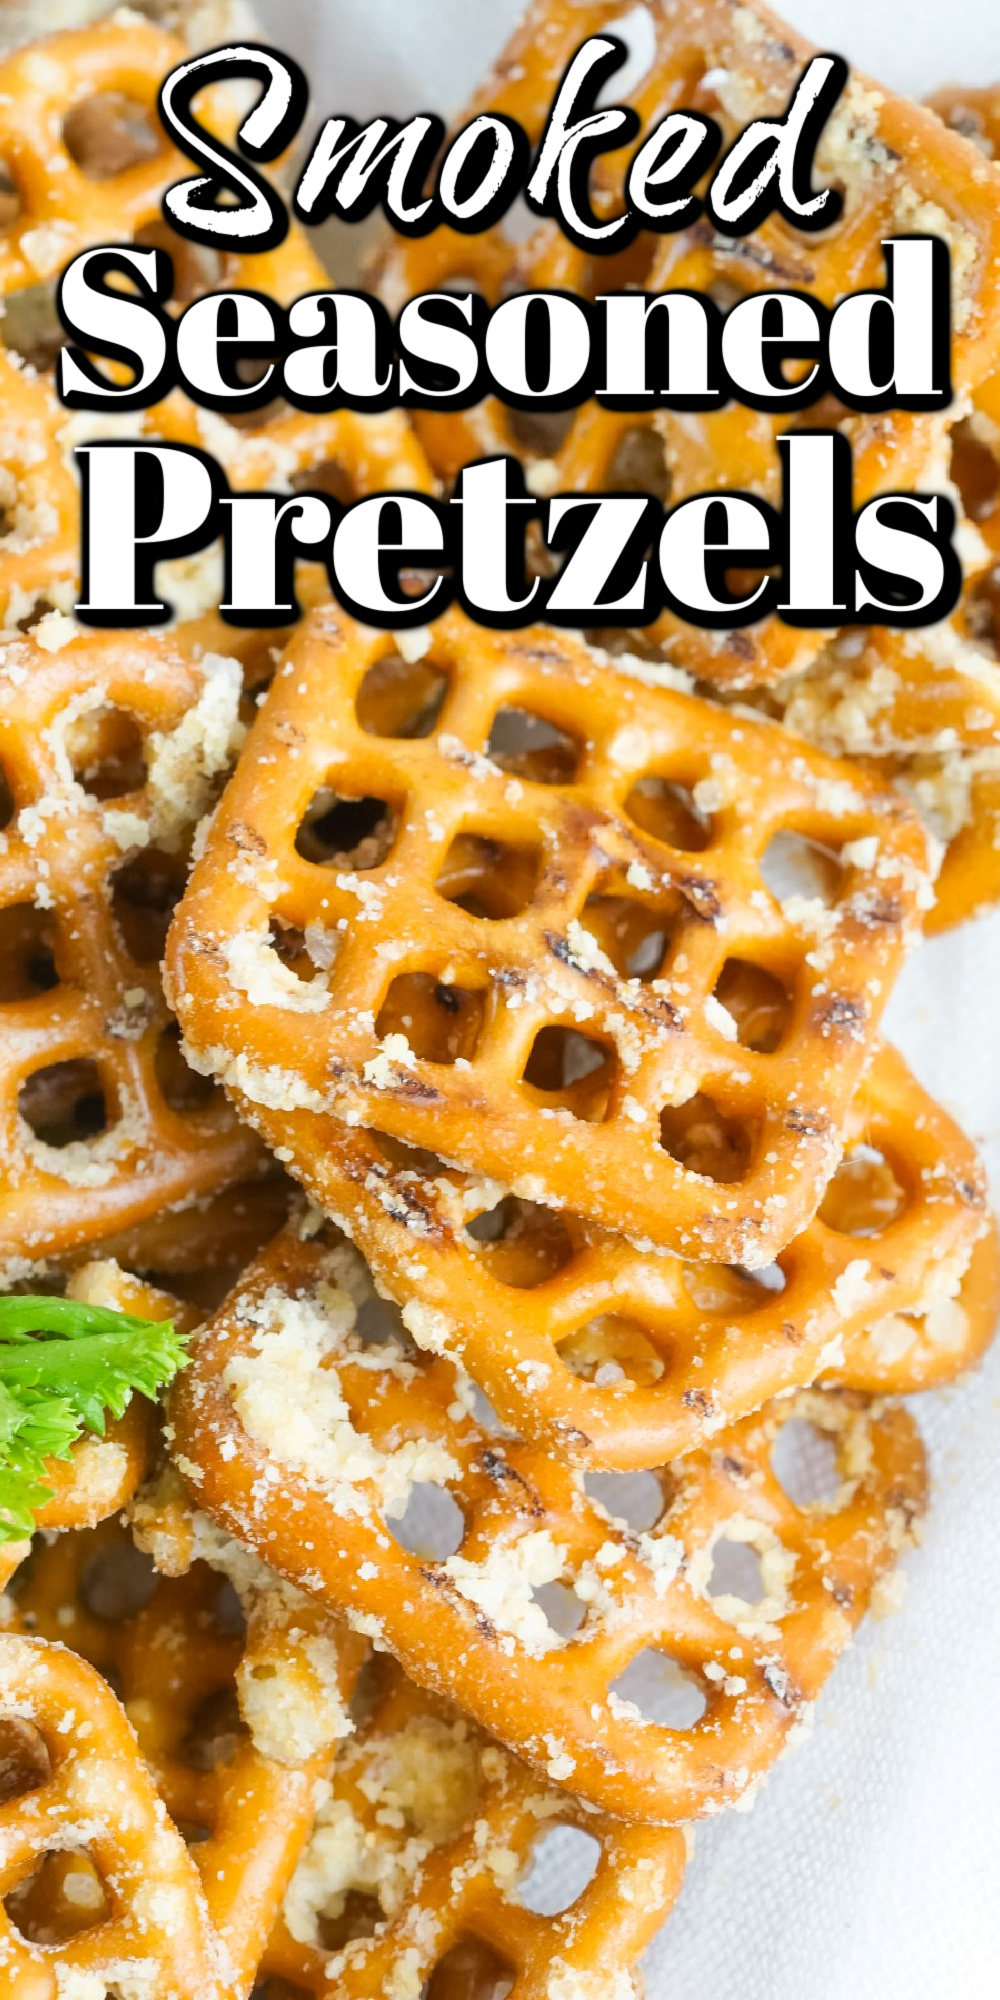 Bump up your snacking with these amazing Smoked Seasoned Pretzels, perfect for a game day or any day!